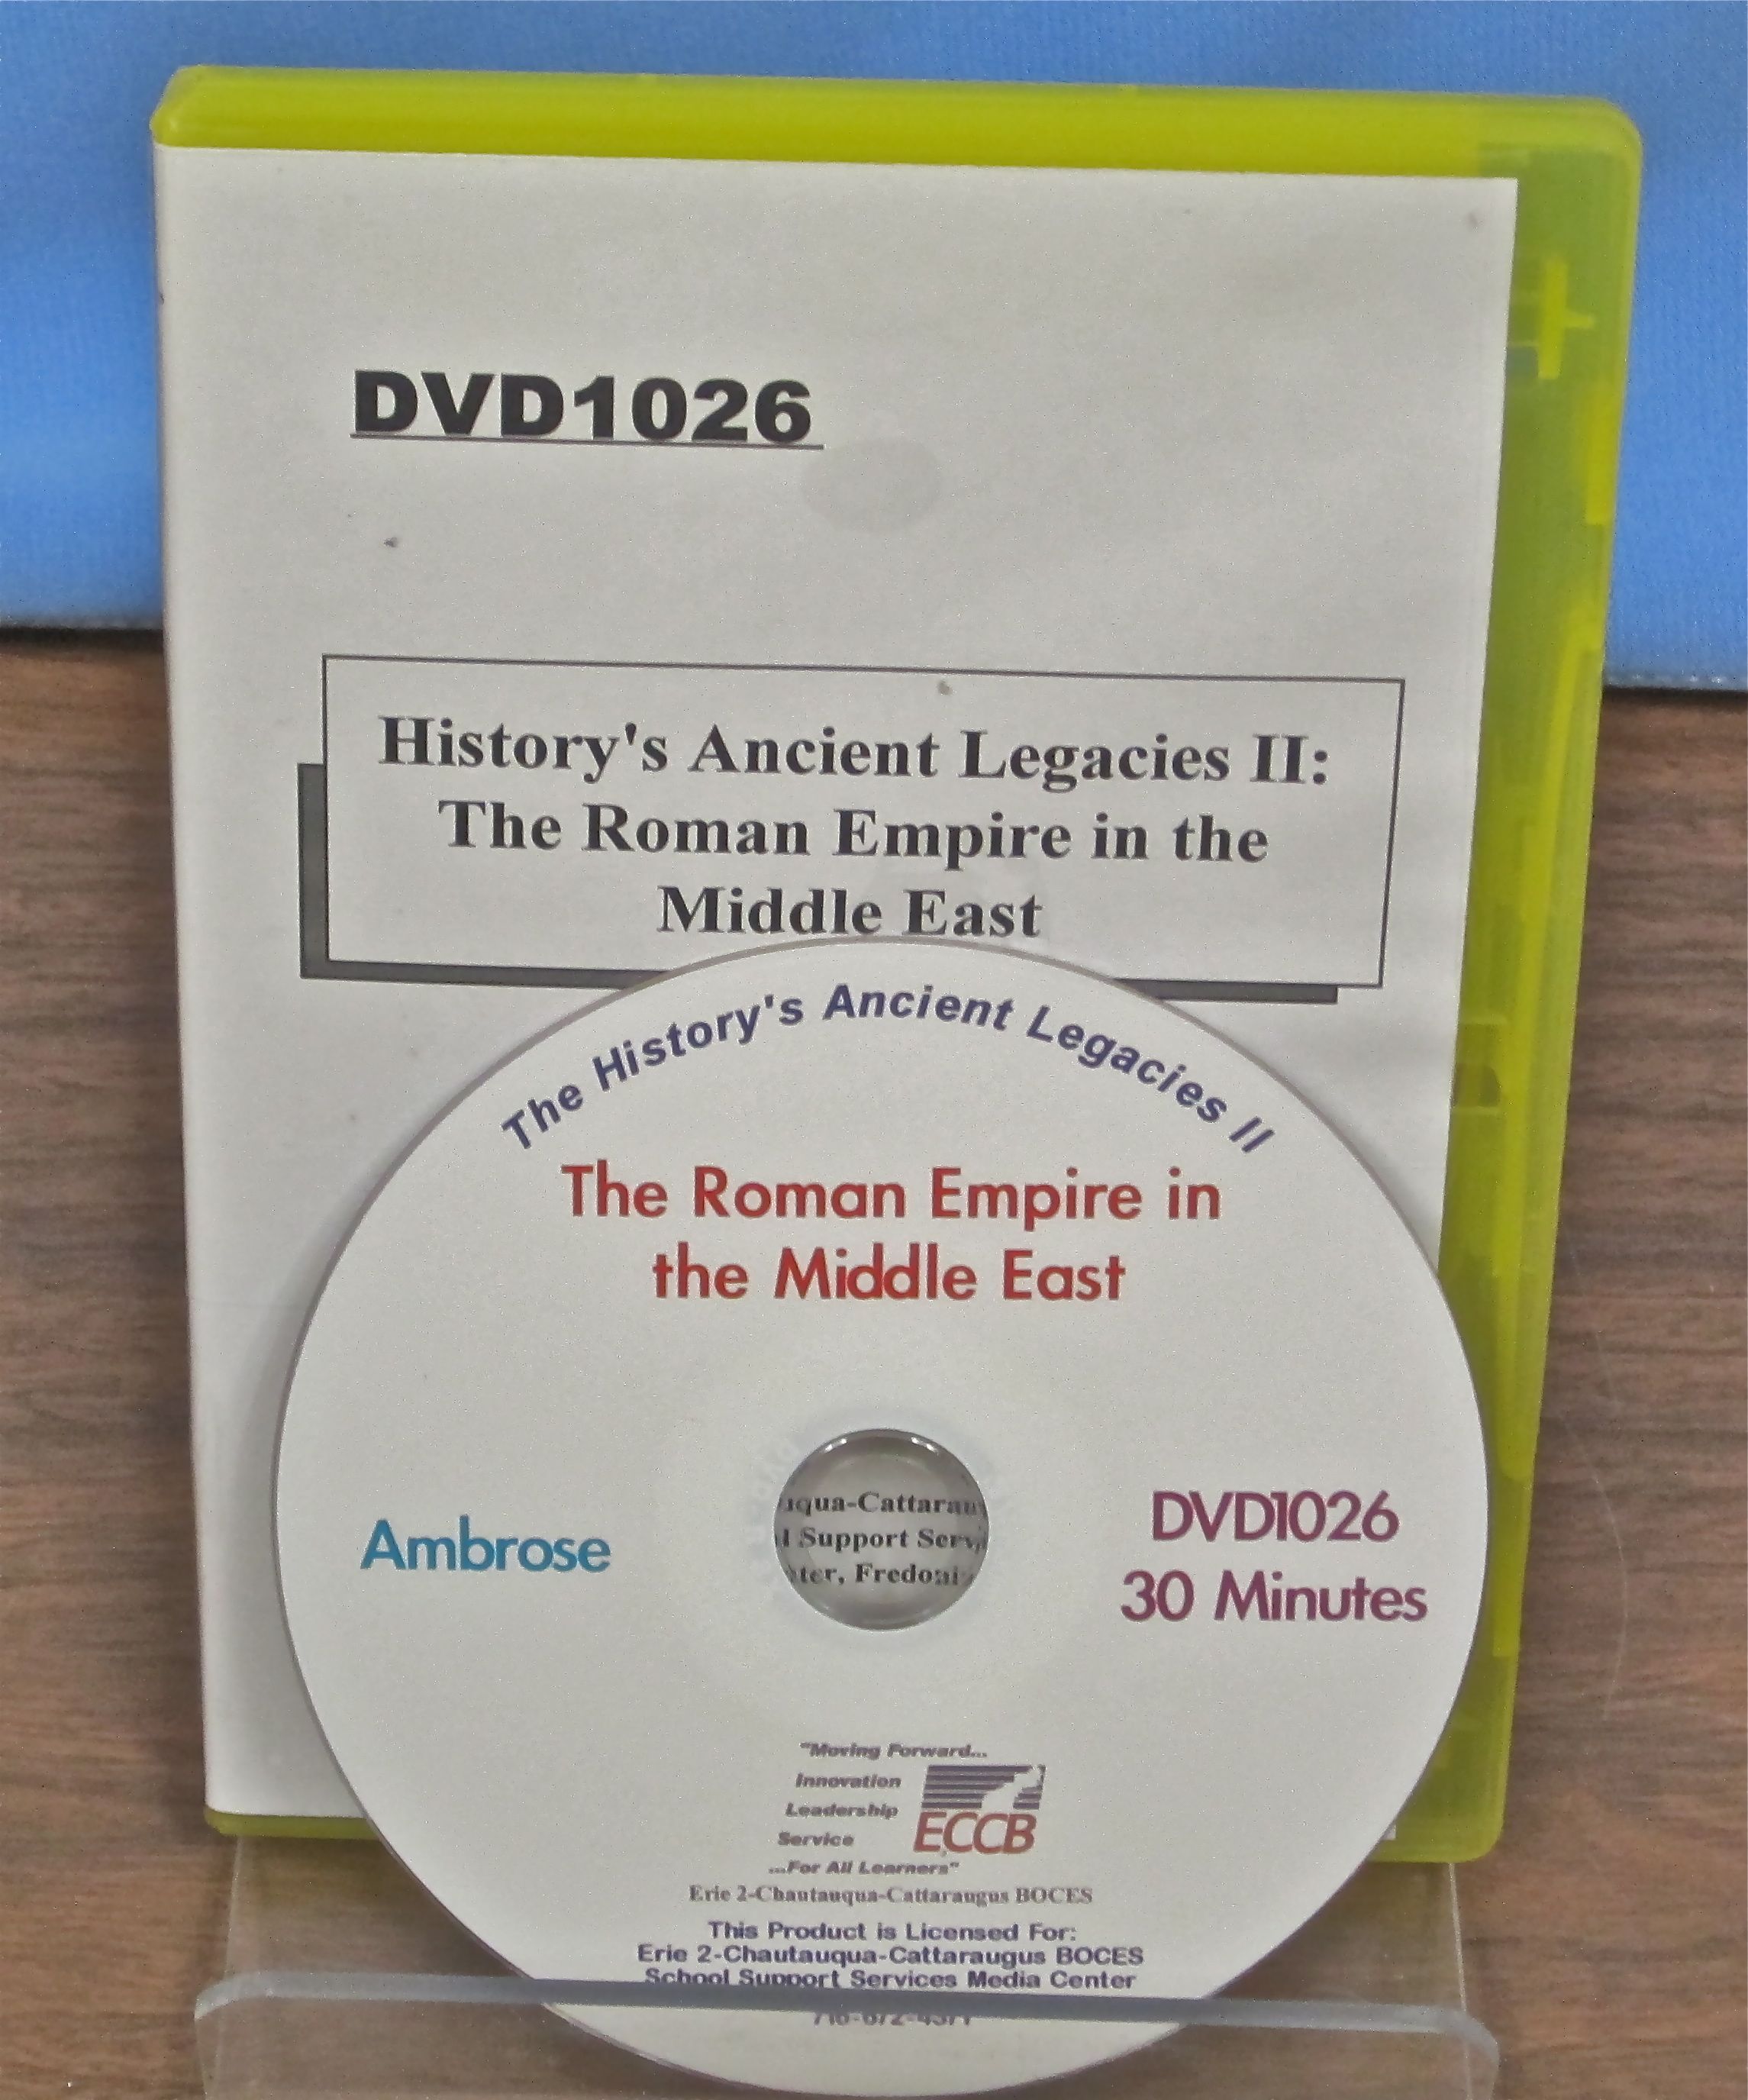 History's Ancient Legacies II: The Roman Empire in the Middle East